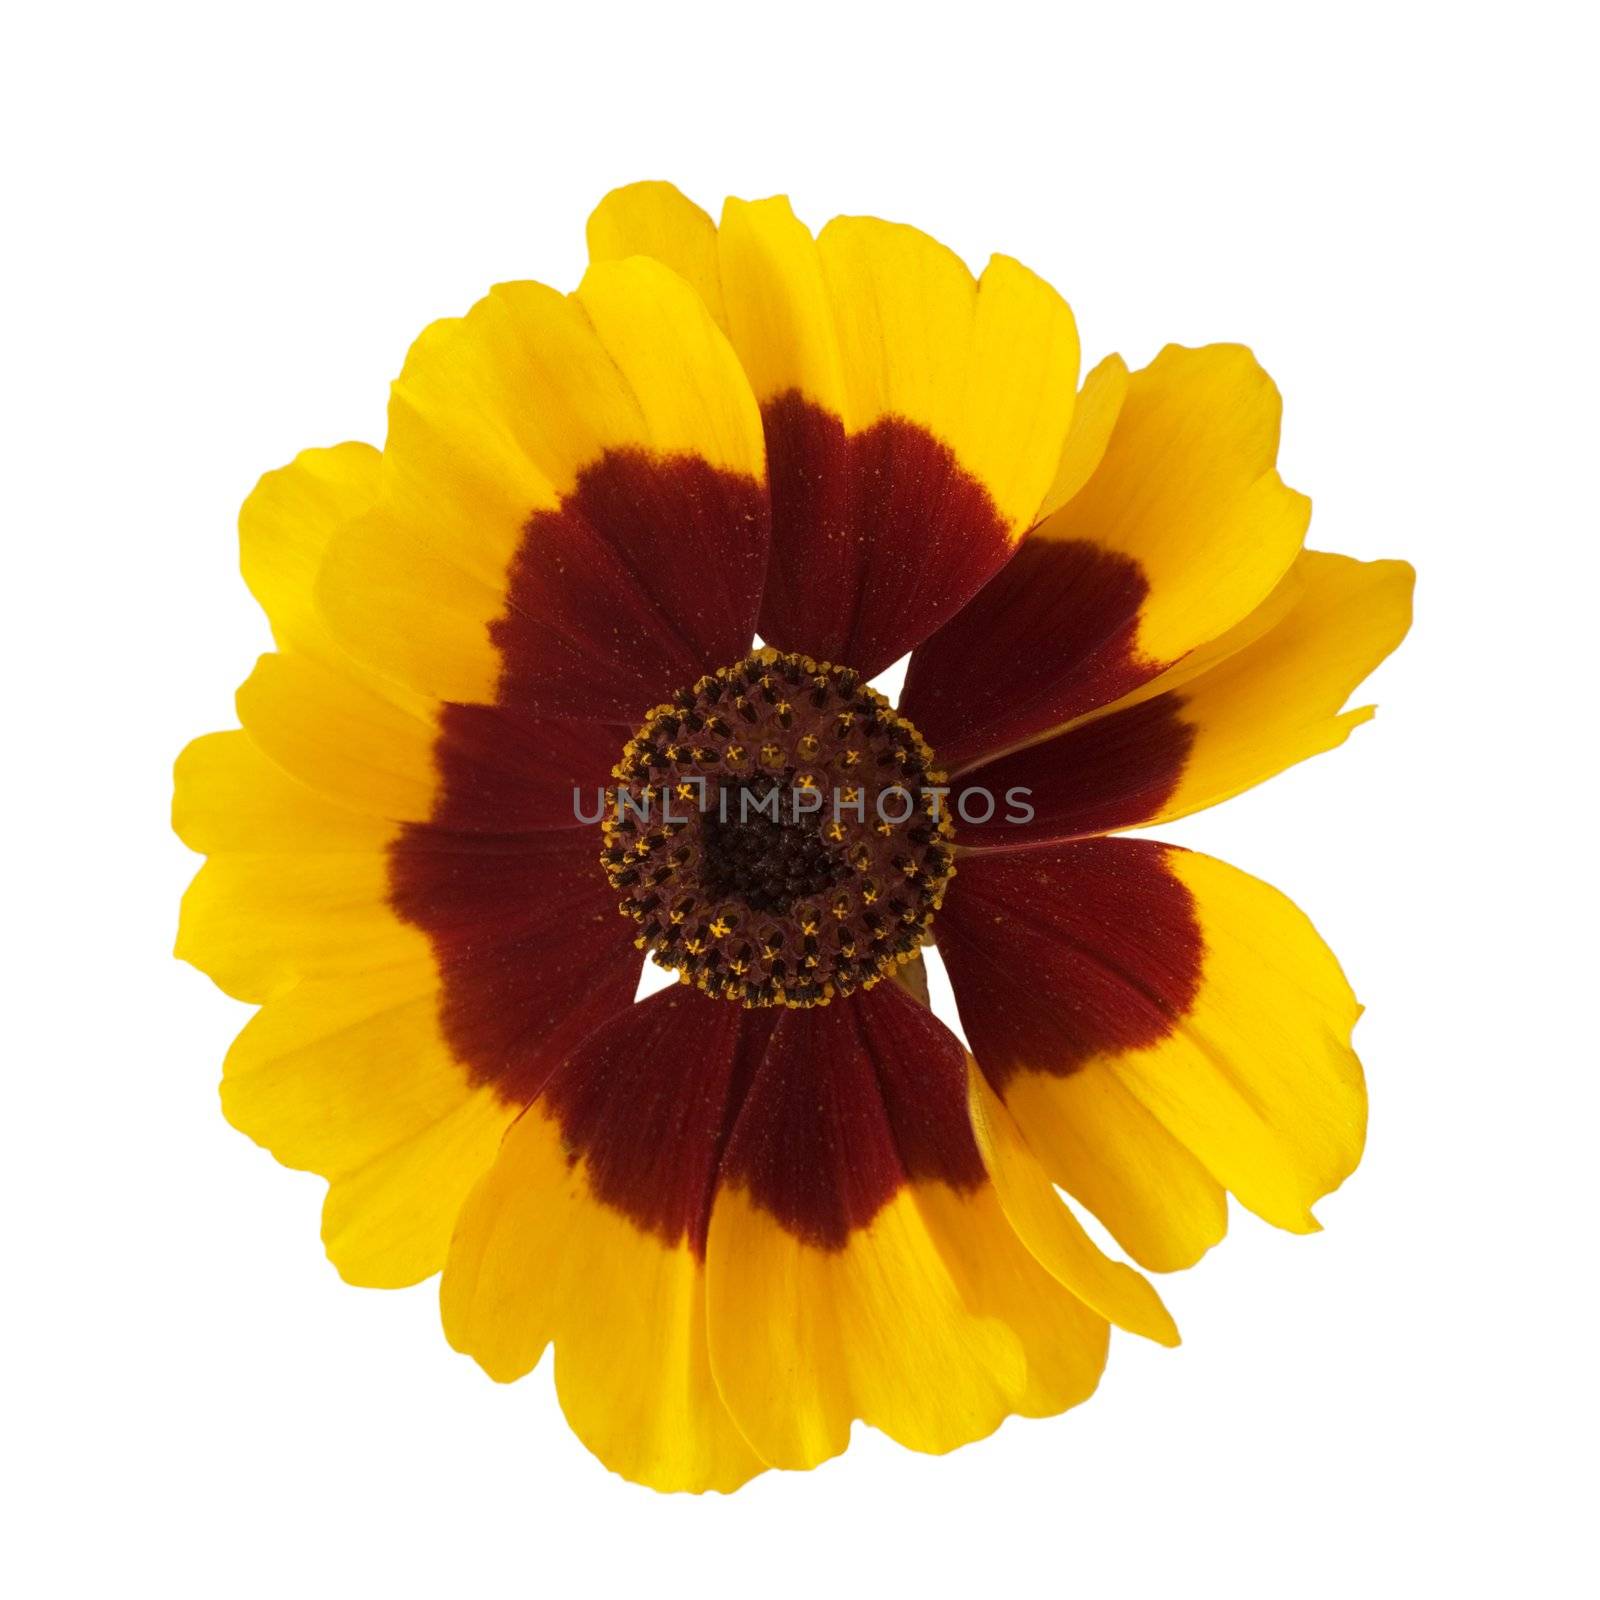 The single yellow flower on white background